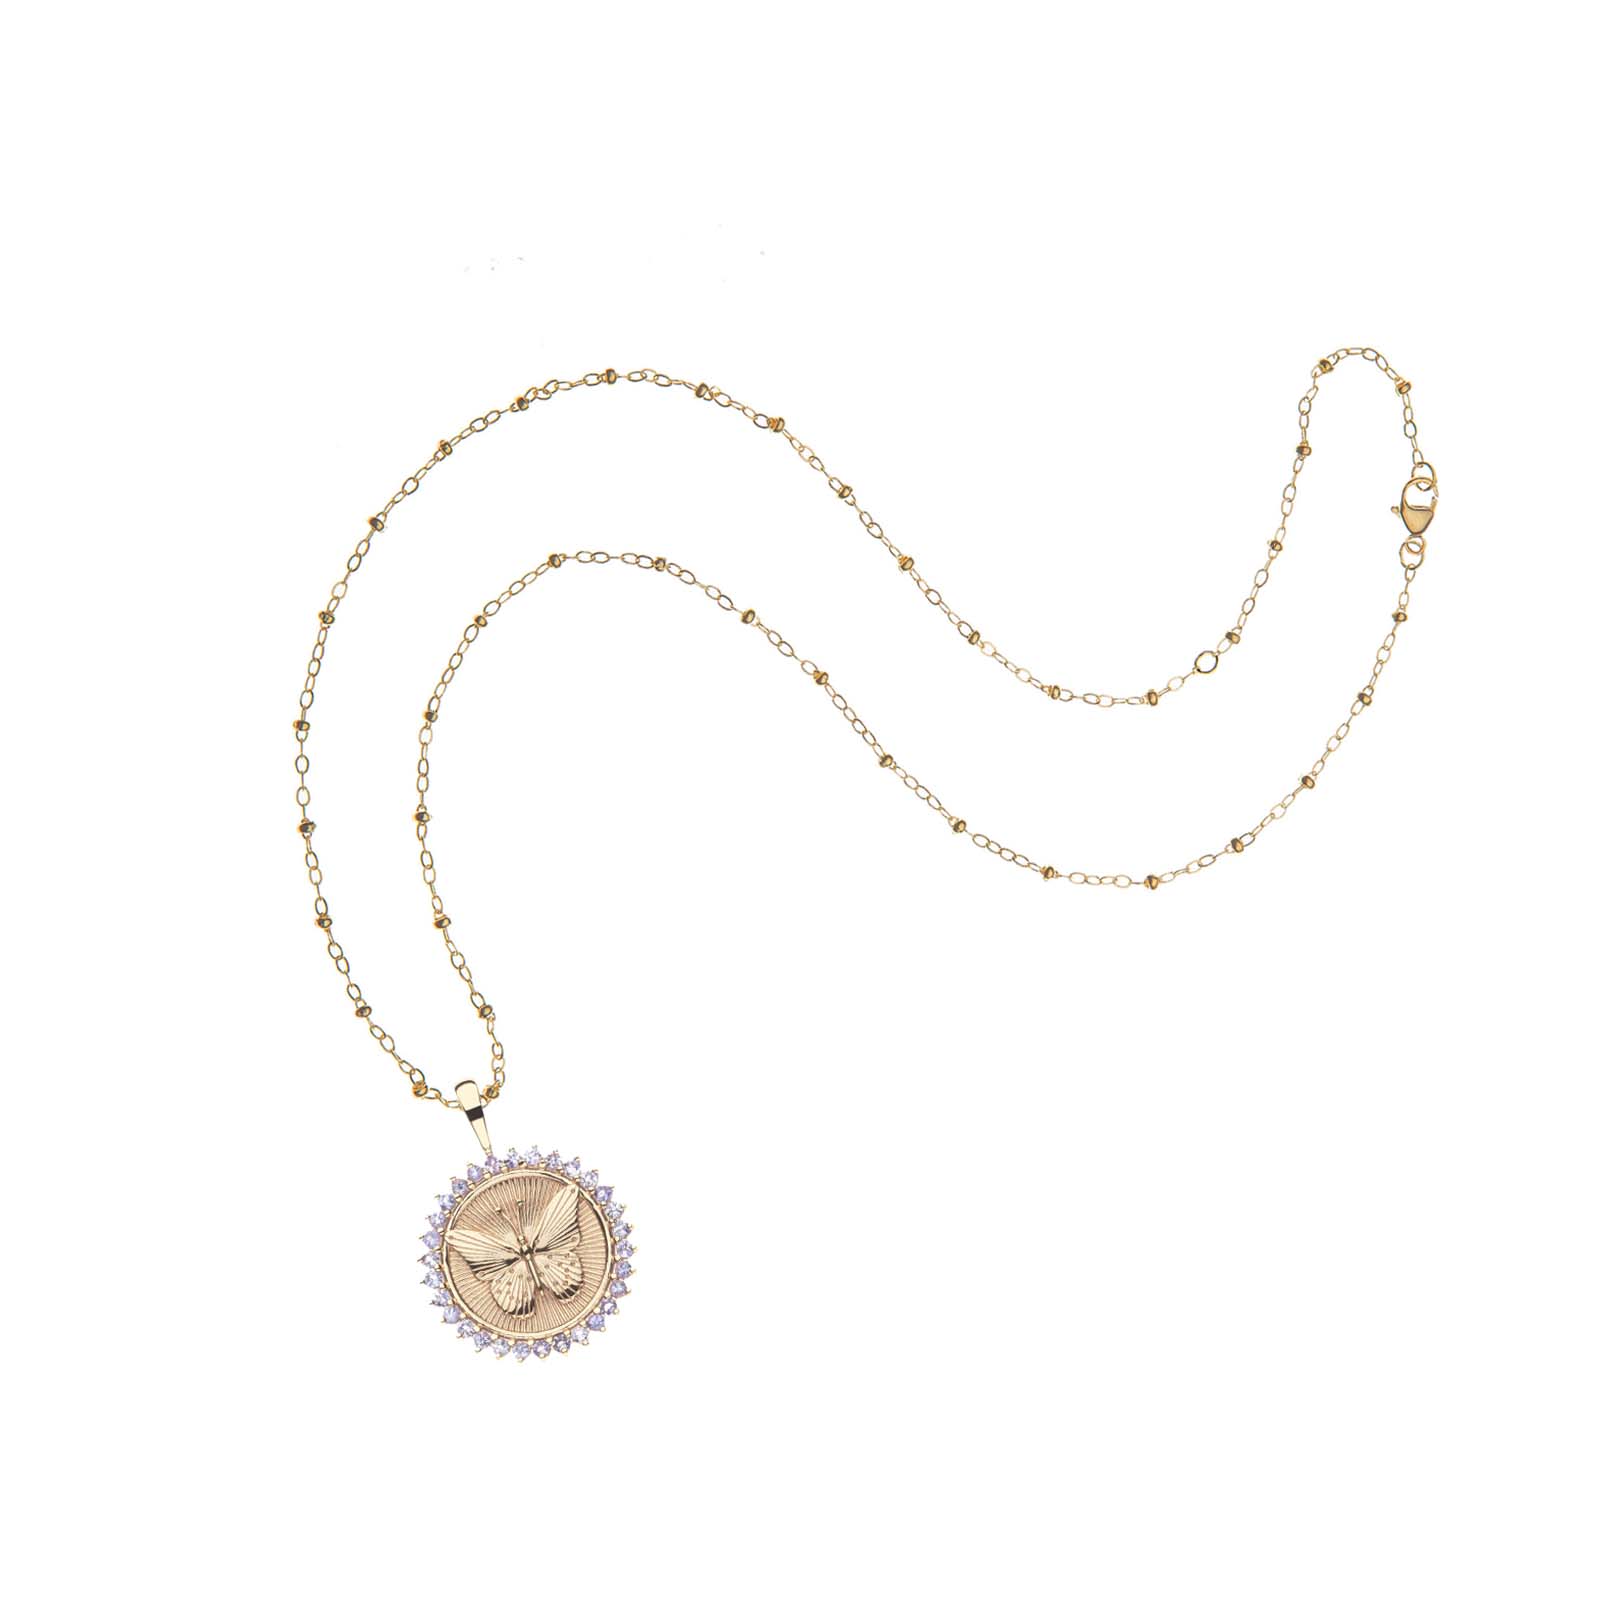 FREE Petite Embellished Coin